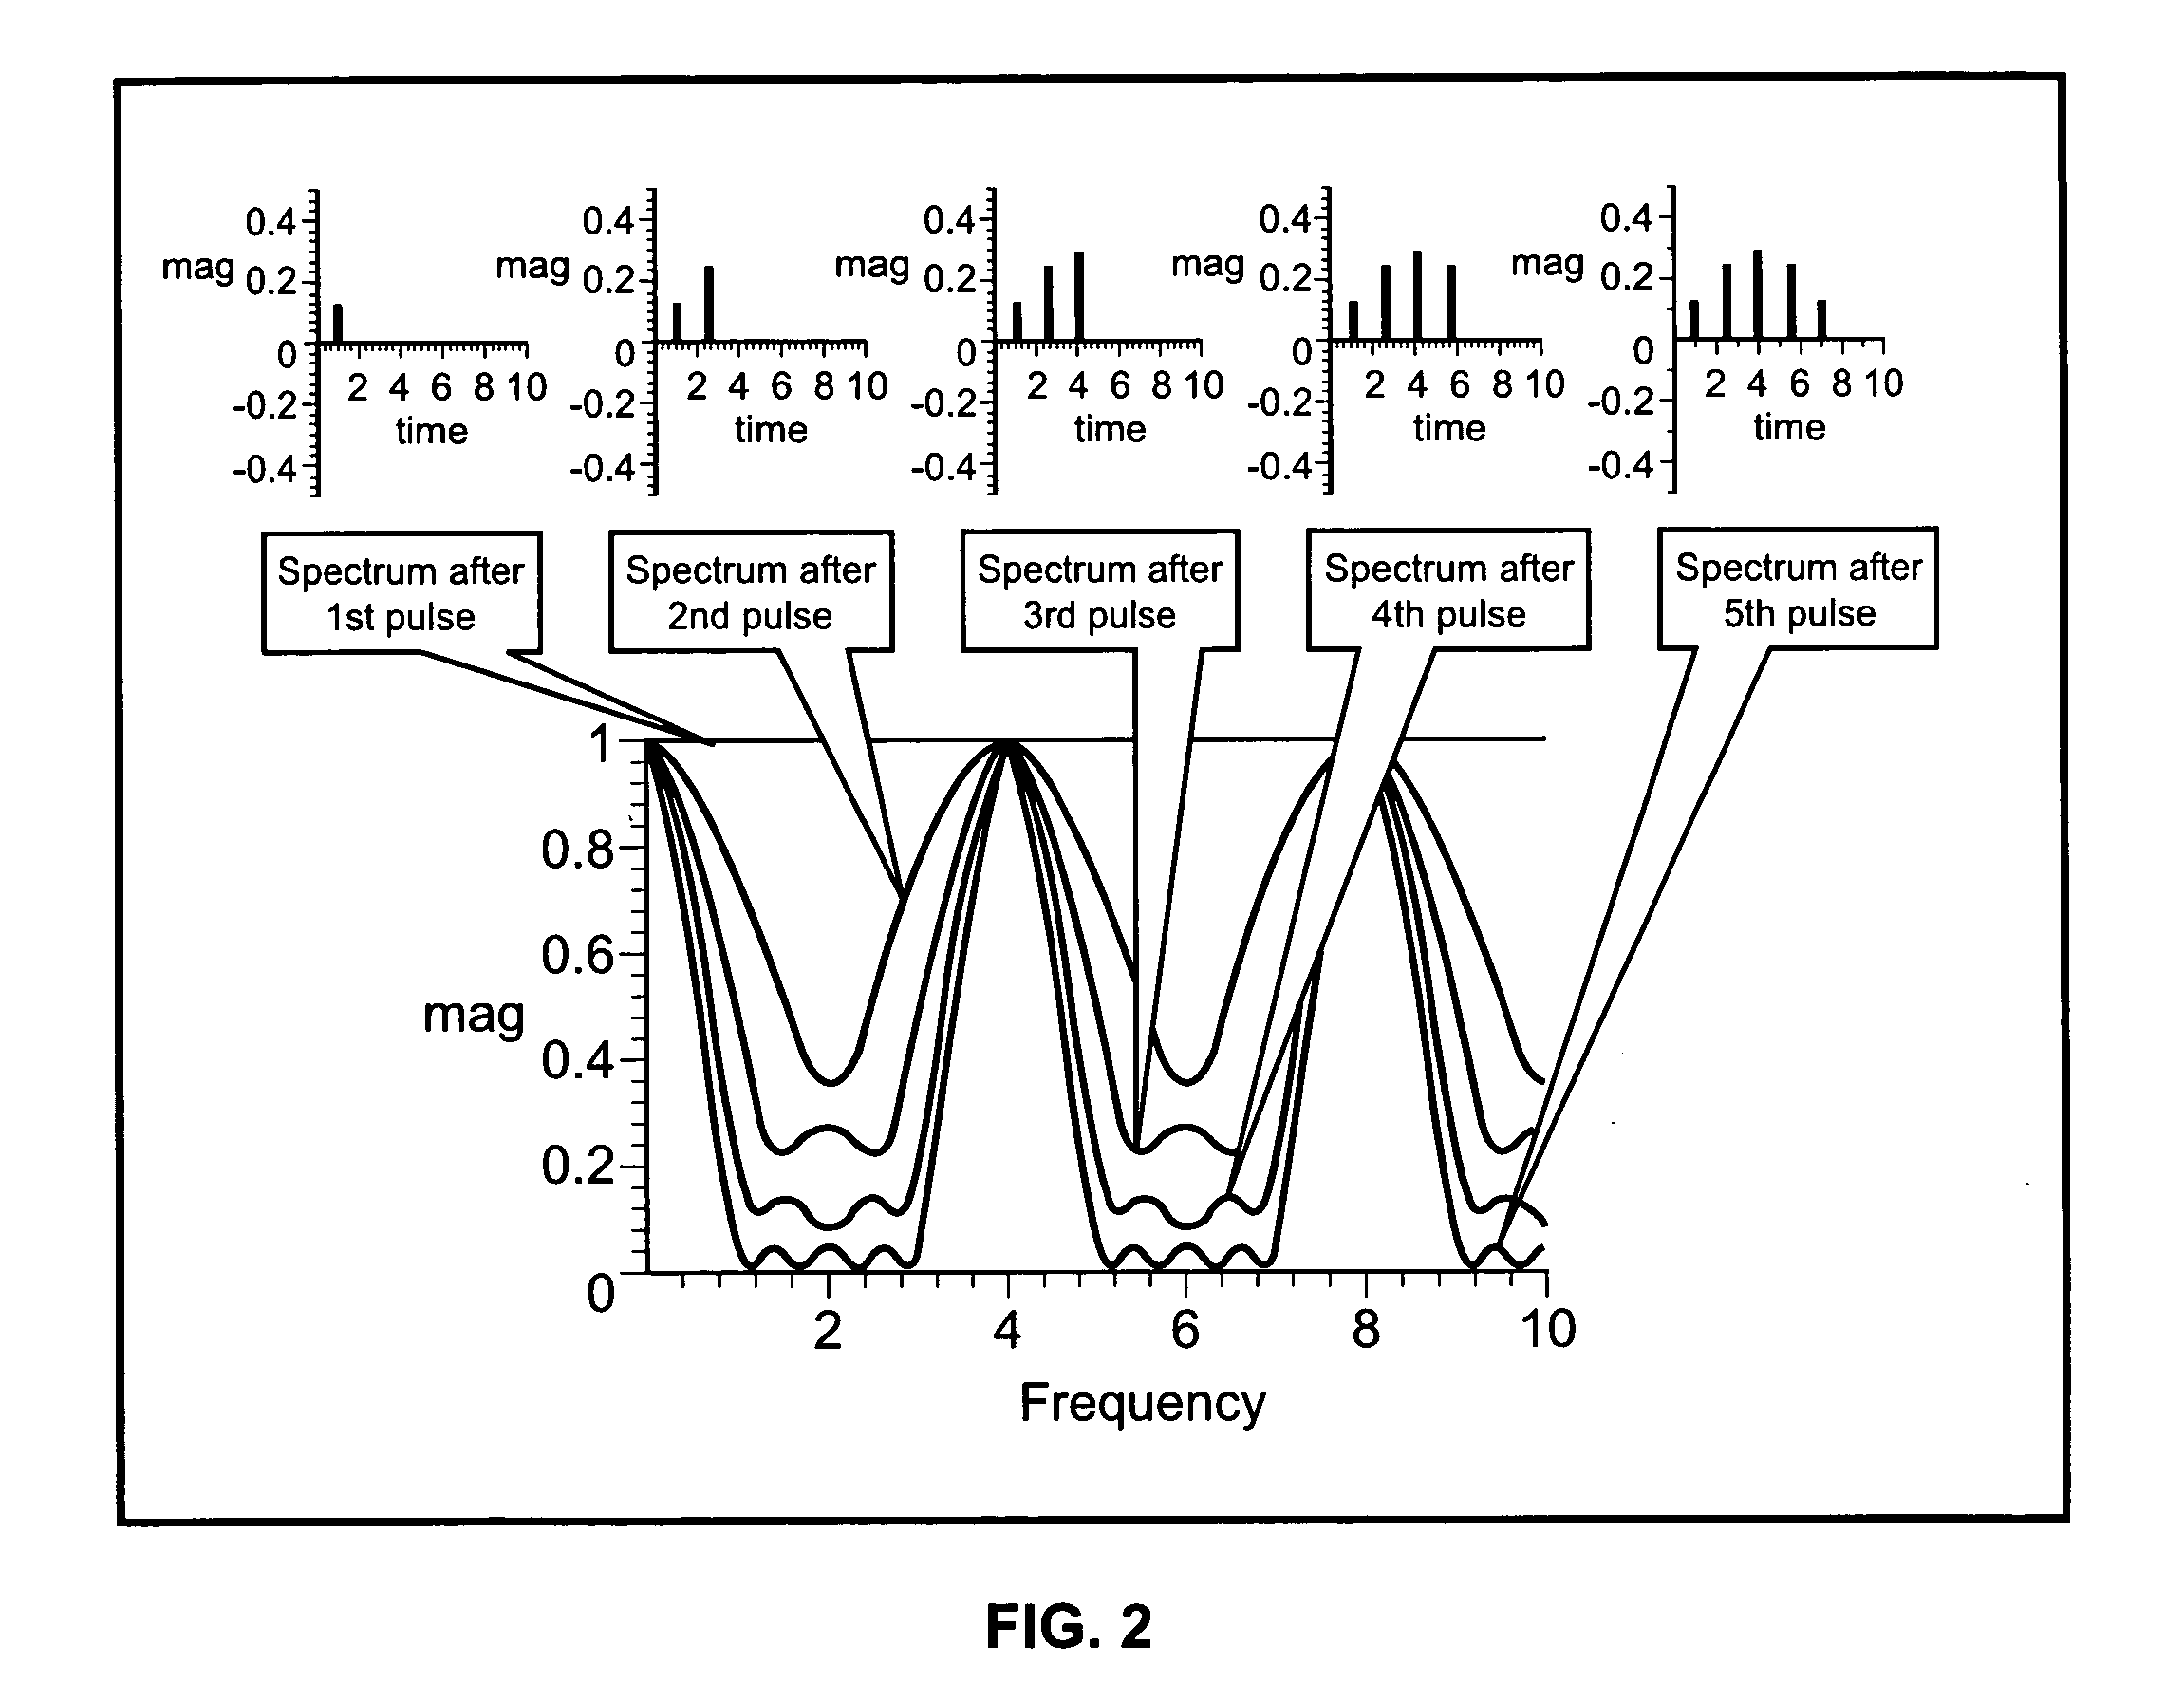 Wideband suppression of motion-induced vibration